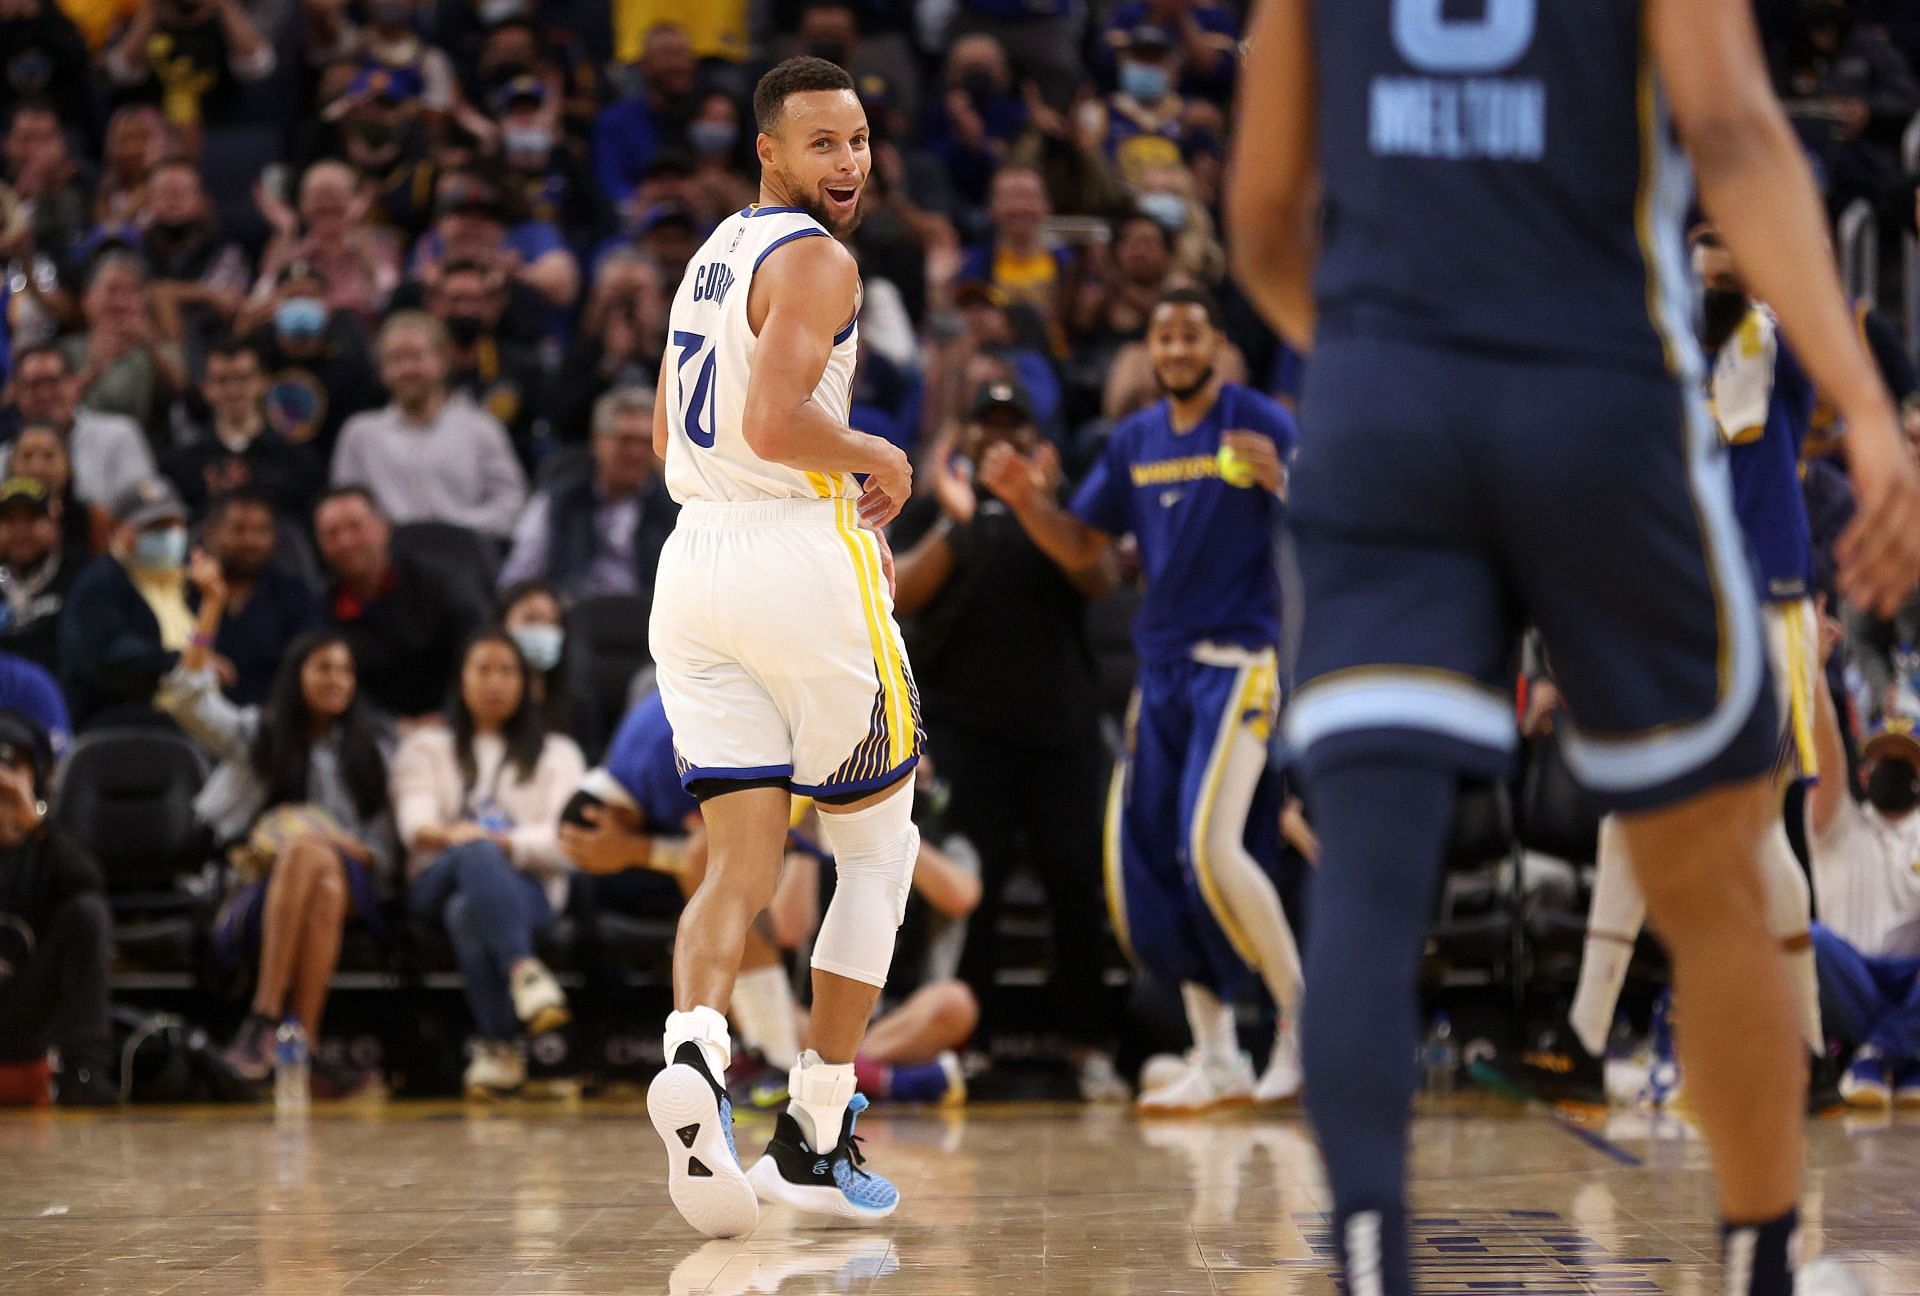 Early in the NBA season, Steph Curry is showing who is best